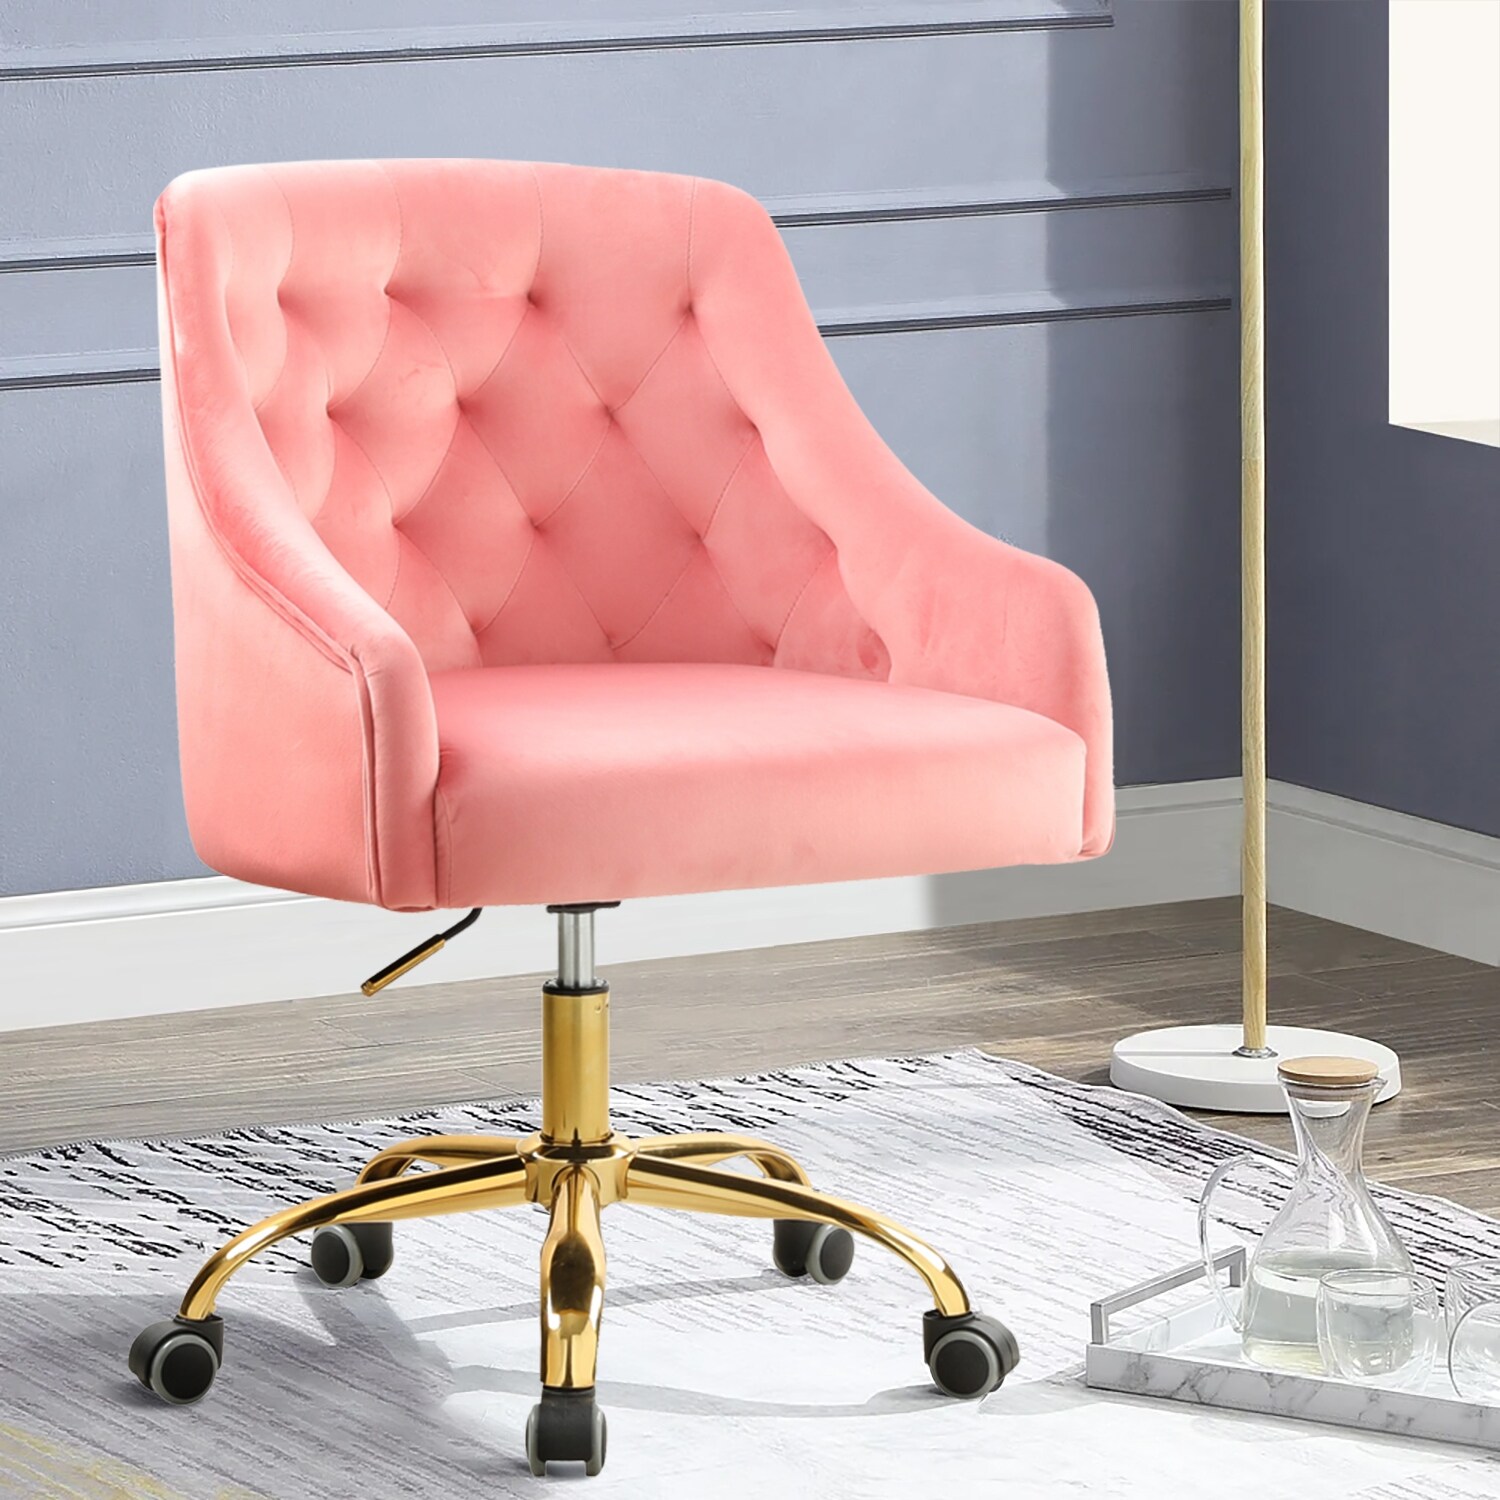 https://ak1.ostkcdn.com/images/products/is/images/direct/037bdbe6c6ea3c0c5a442b341db8747eefe3dd28/Velvet-Swivel-Upholstered-adjustable-height-Home-office-Chair-With-Golden-Legs.jpg